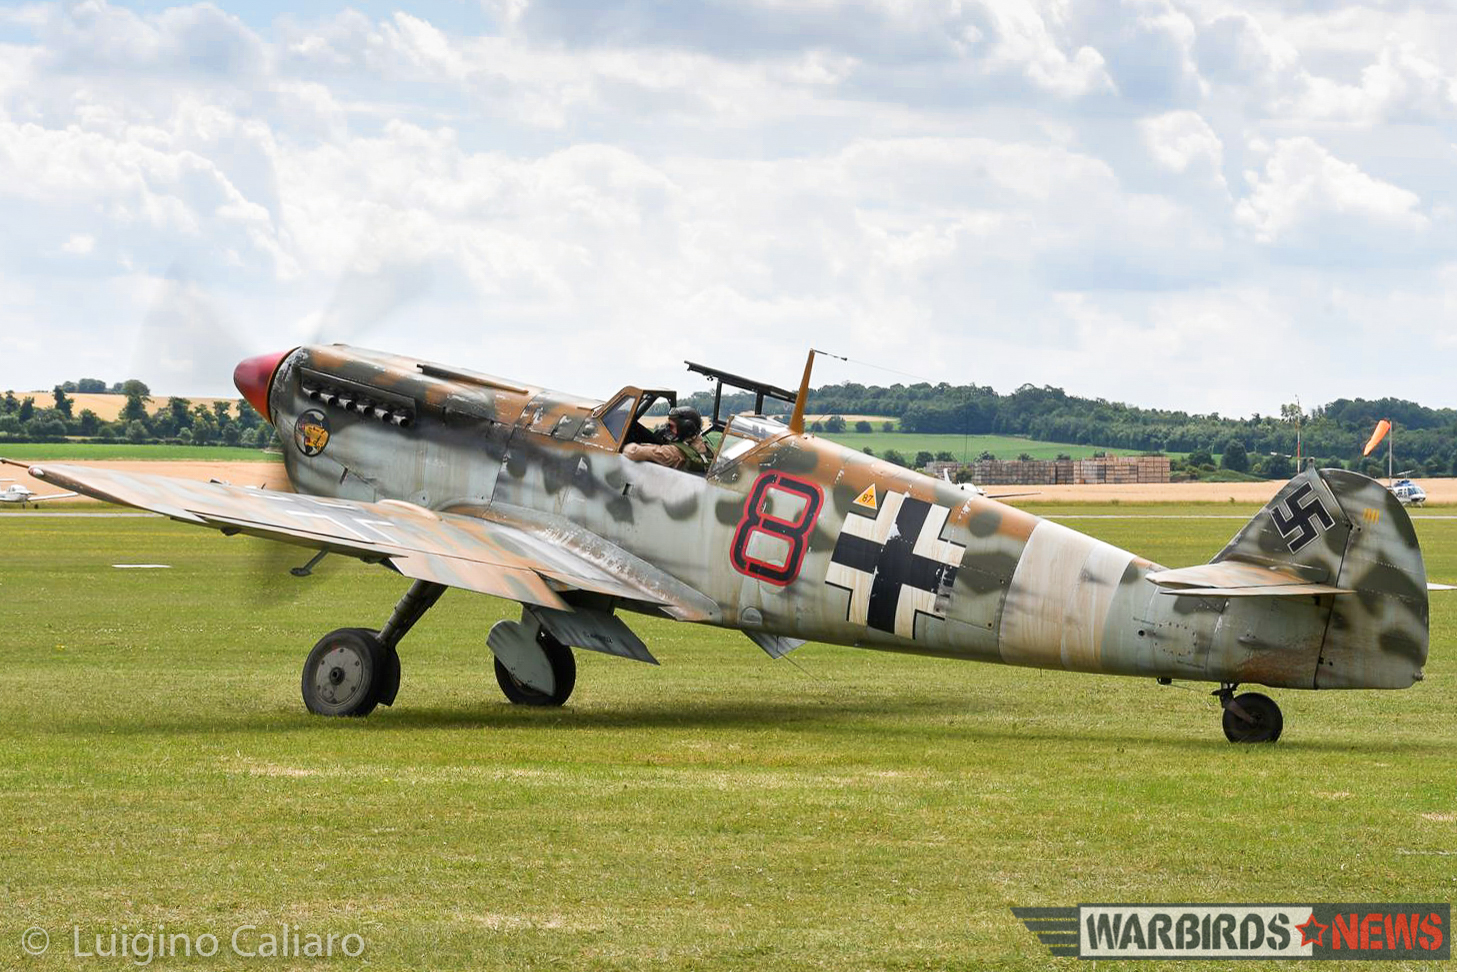 ARCo's Hispano Buchon mocked up in desert cammo as a JG27 Bf 109E. The paint is water soluble. (photo by Luigino Caliaro) (photo by Luigino Caliaro)